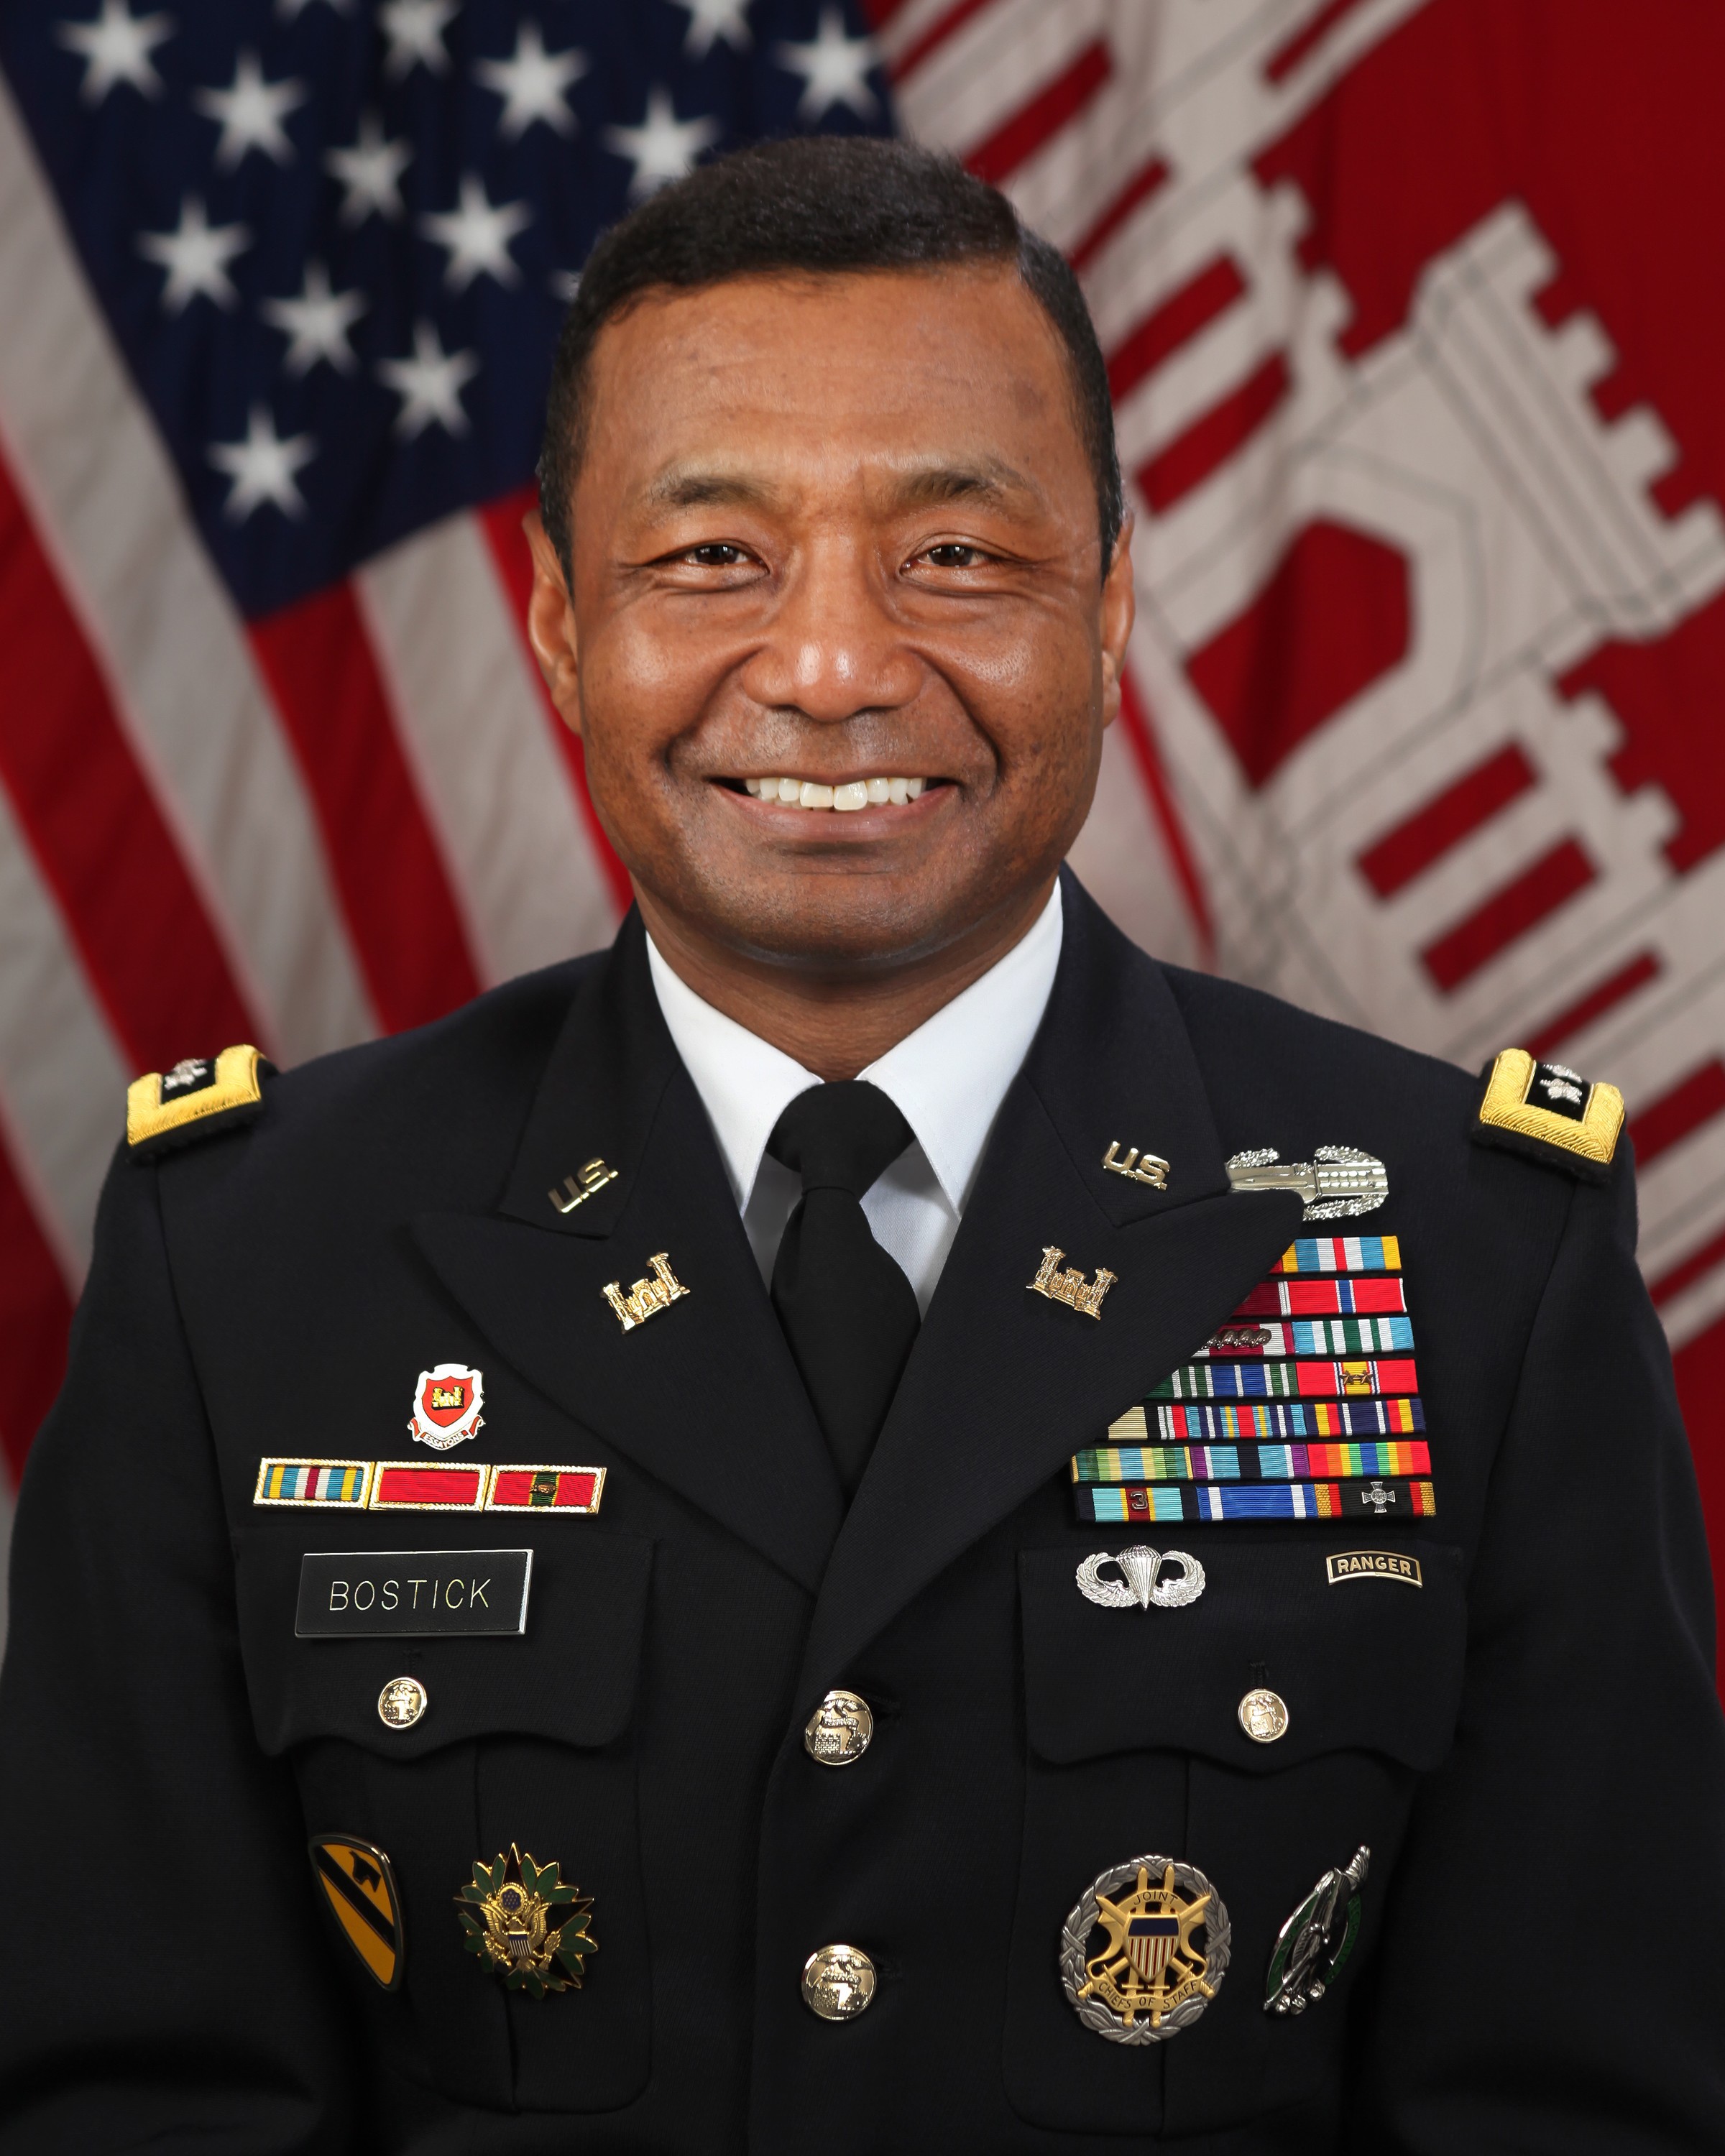 Army General Pictures Engineer commander caps 38 years of Army service